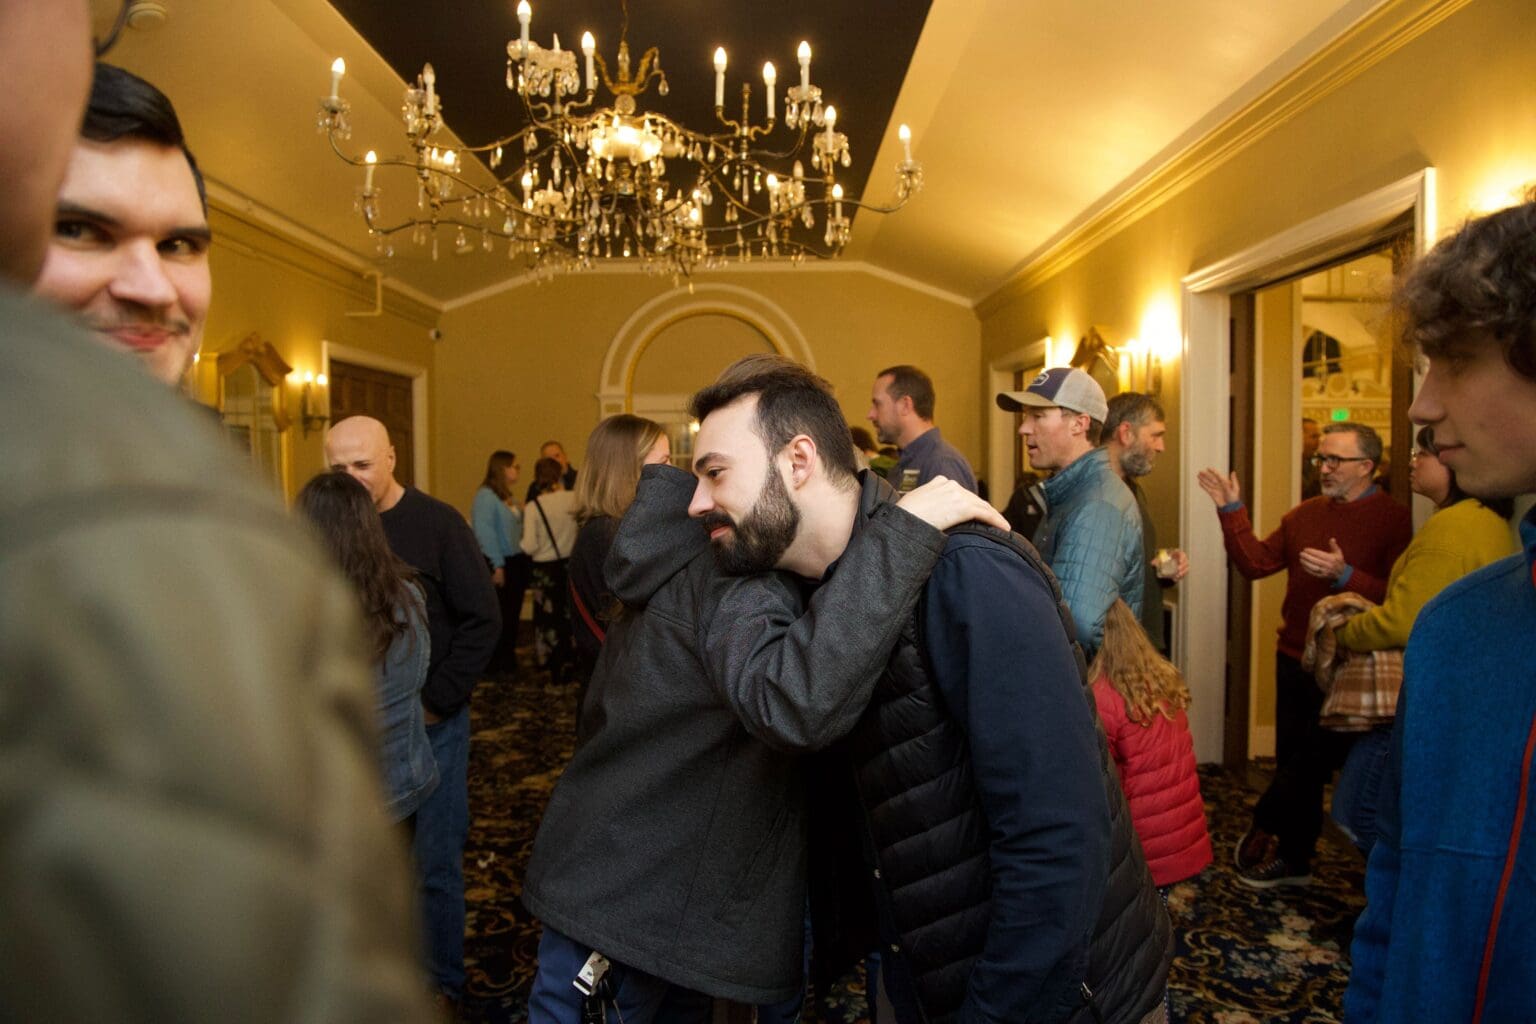 Bellingham City Council at-large candidate Jace Cotton hugs Joel Pitts-Jordan in the middle of a crowded room.